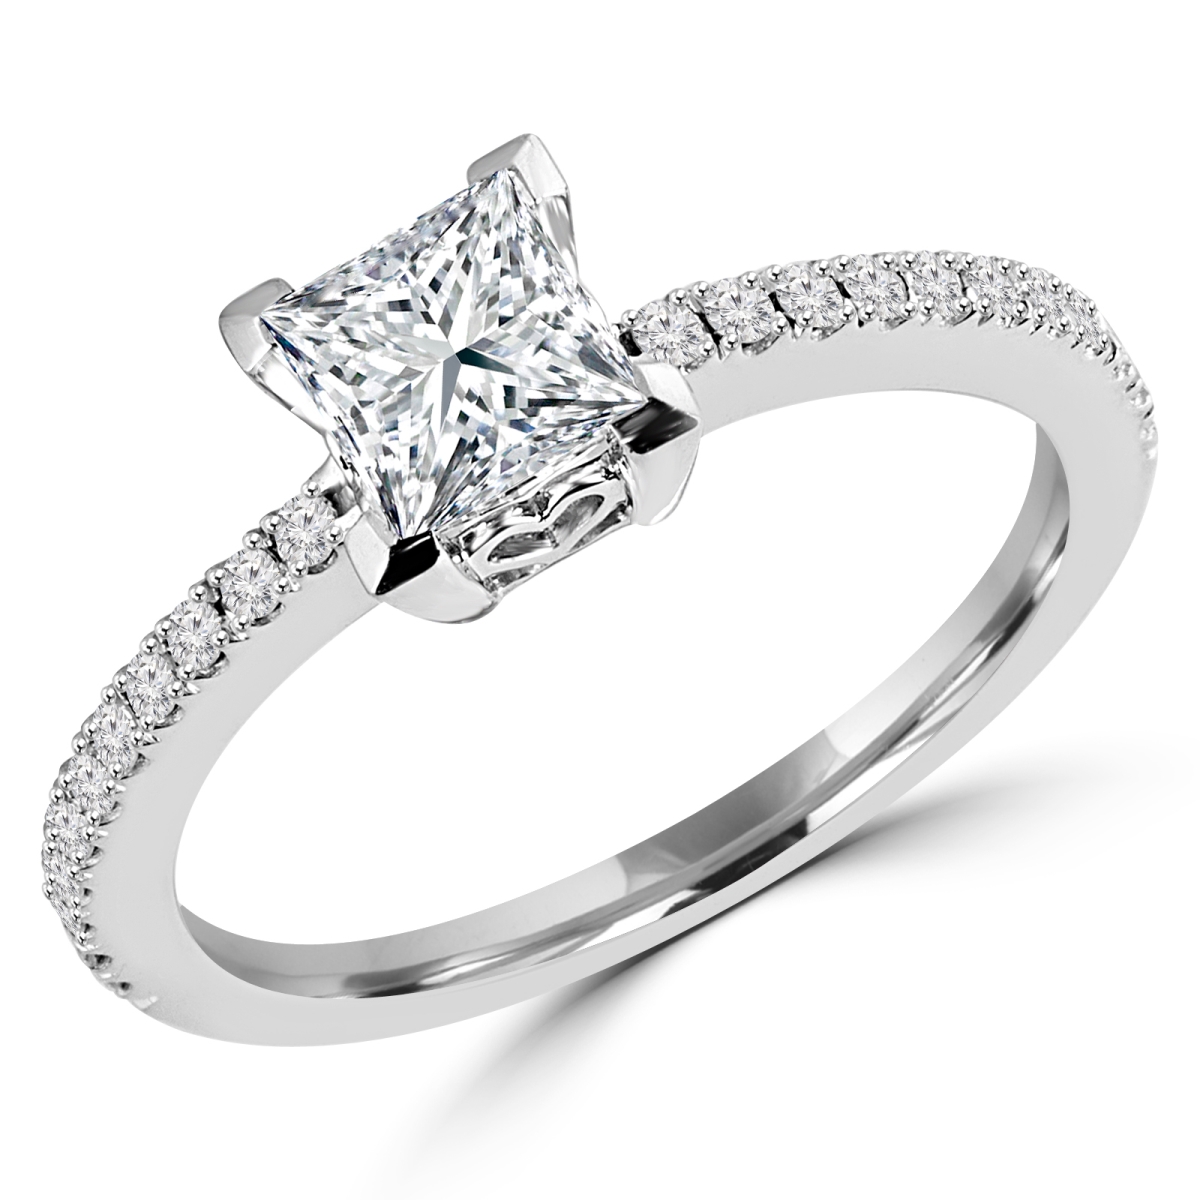 Picture of Majesty Diamonds MD180243-P 0.87 CTW Princess Diamond Solitaire with Accents Engagement Ring in 14K White Gold